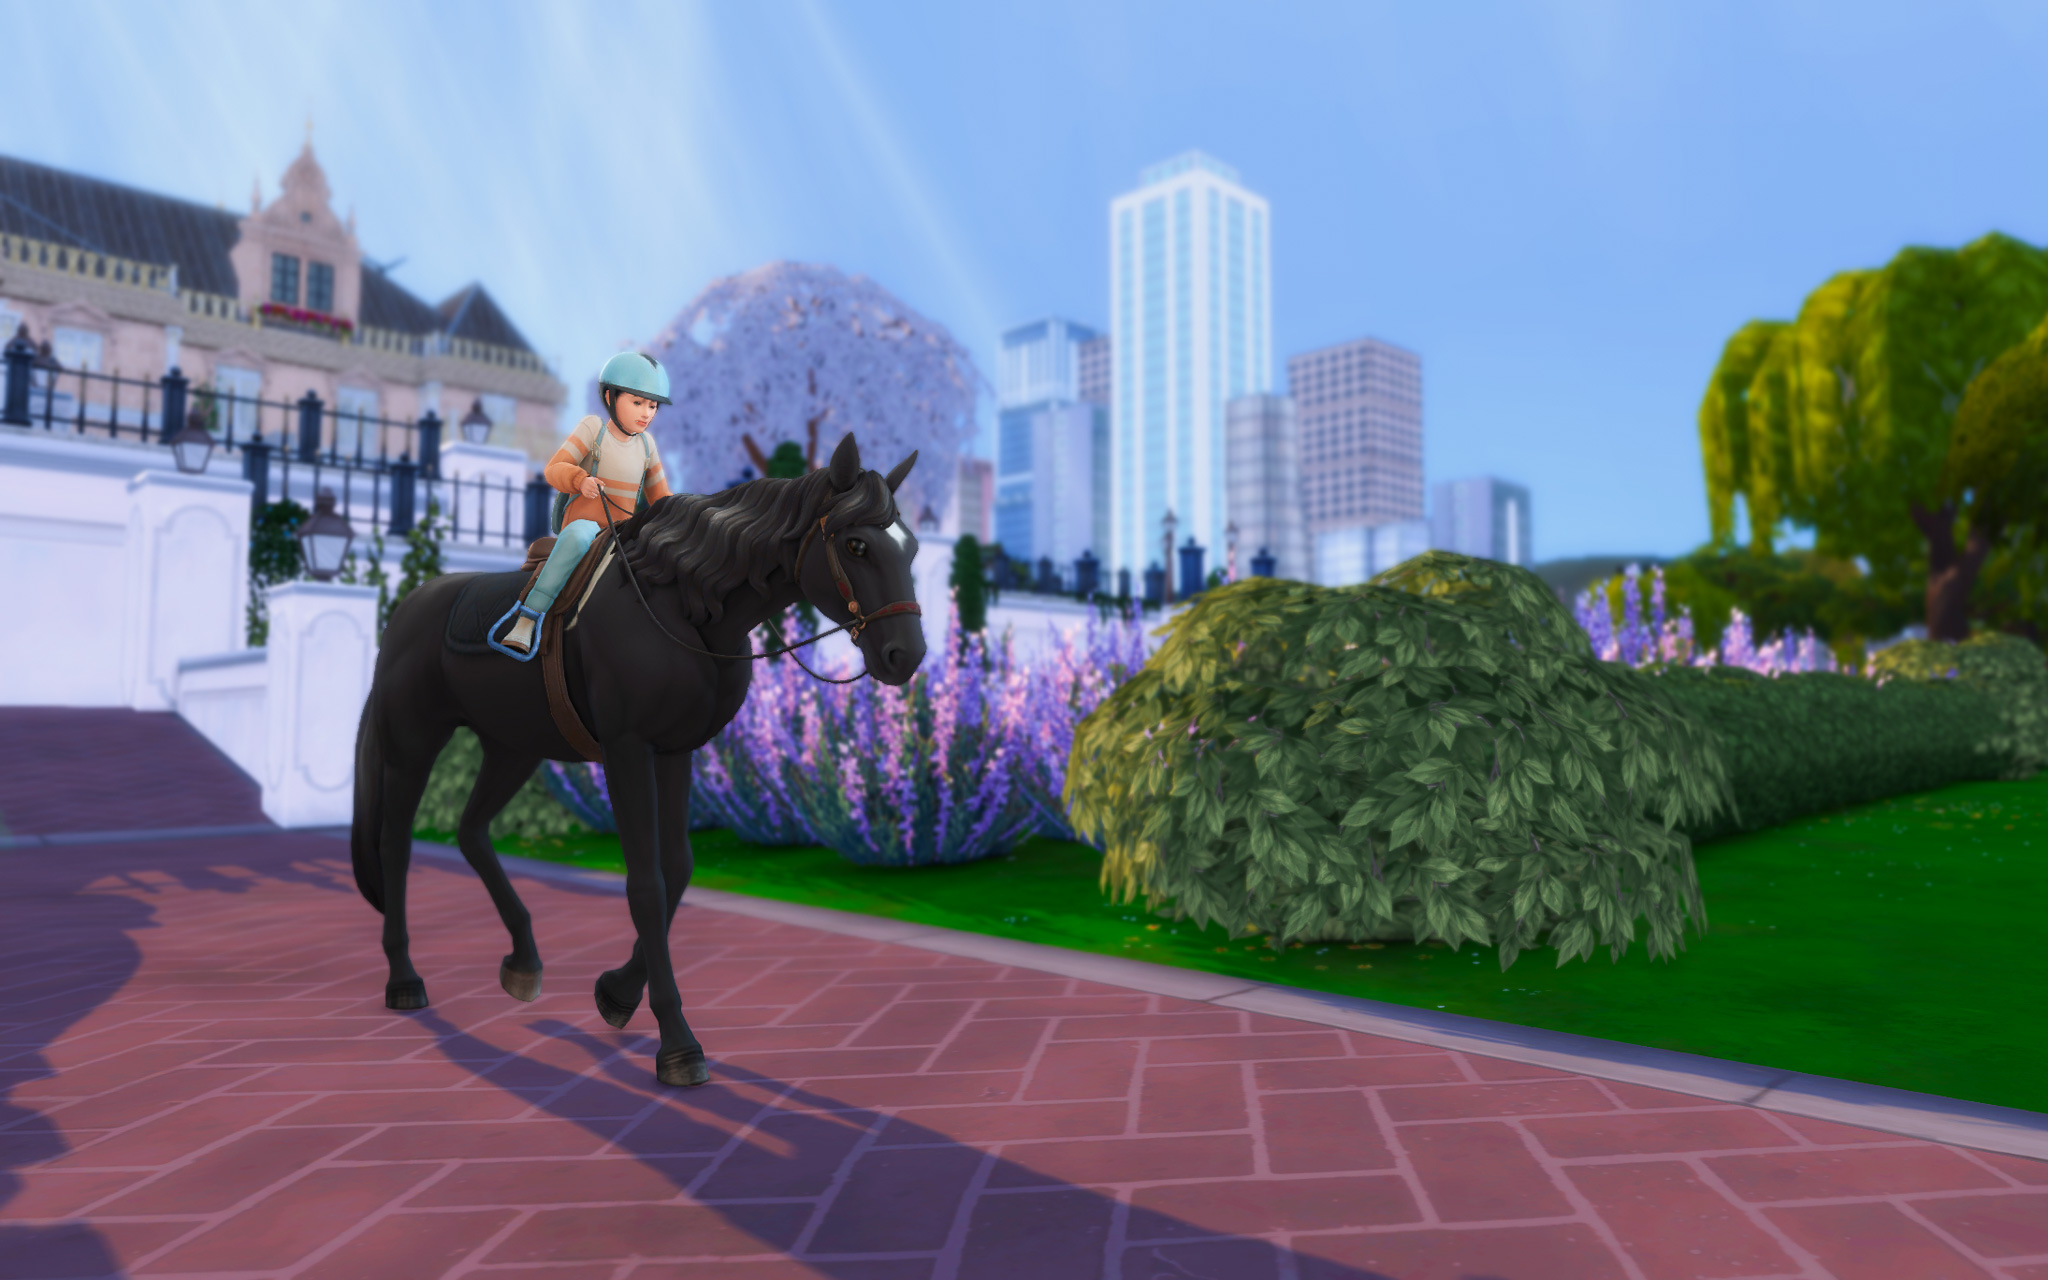 Ennik wears a helmet and cautiously rides Midnight through the park that surrounds her home. 